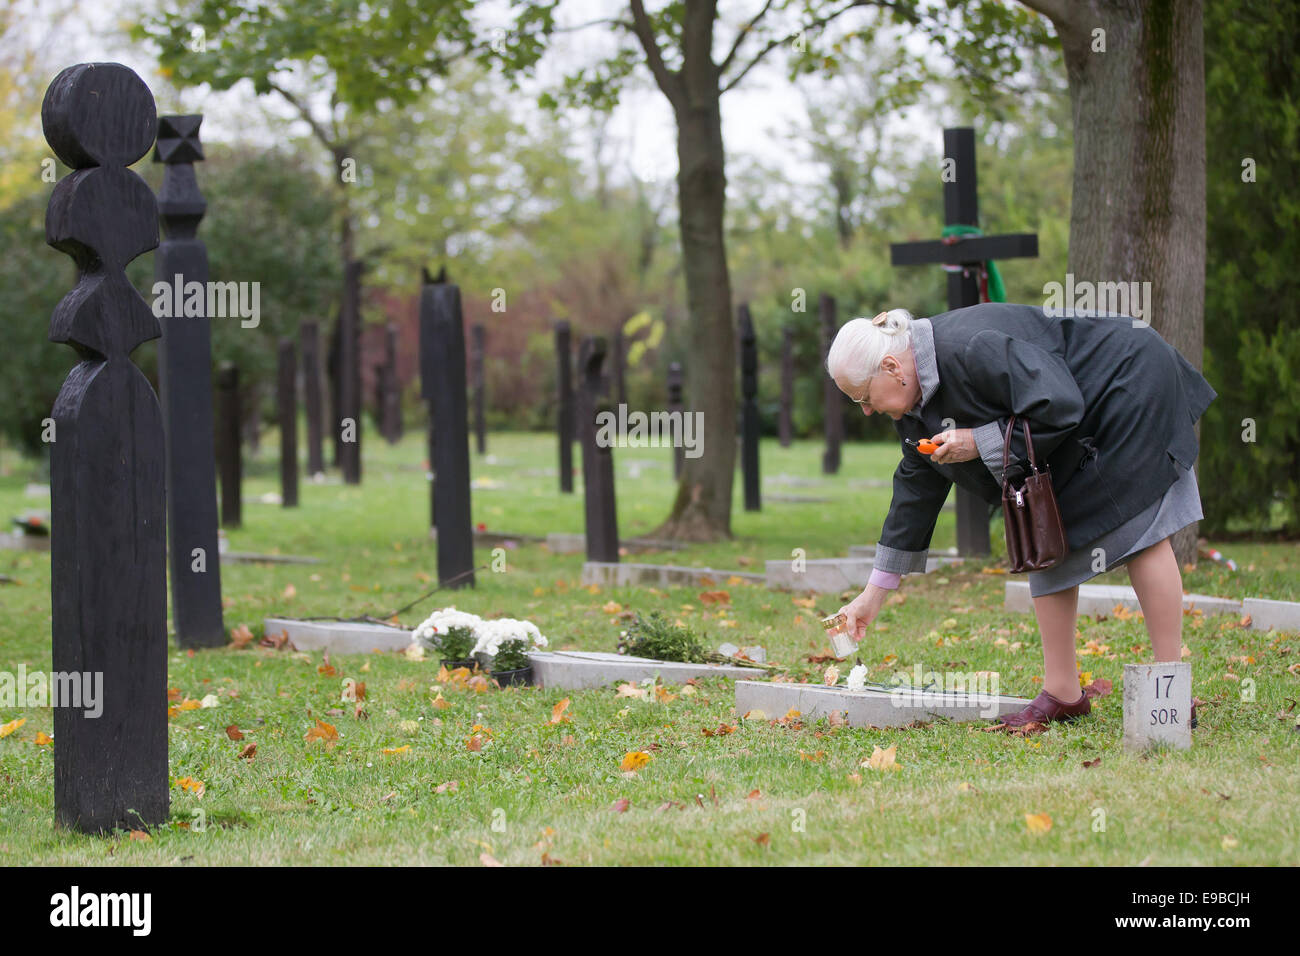 Budapest. 23rd Oct, 2014. A woman lights a candle in memory of her friend in a cemetery on national holiday commemorating the revolution of 1956 in Budapest, Hungary on Oct. 23, 2014. Hungarians marked Thursday with a series of events remembering the failed 1956 revolution that began on Oct. 23, exactly 58 years ago. Credit:  Attila Volgyi/Xinhua/Alamy Live News Stock Photo